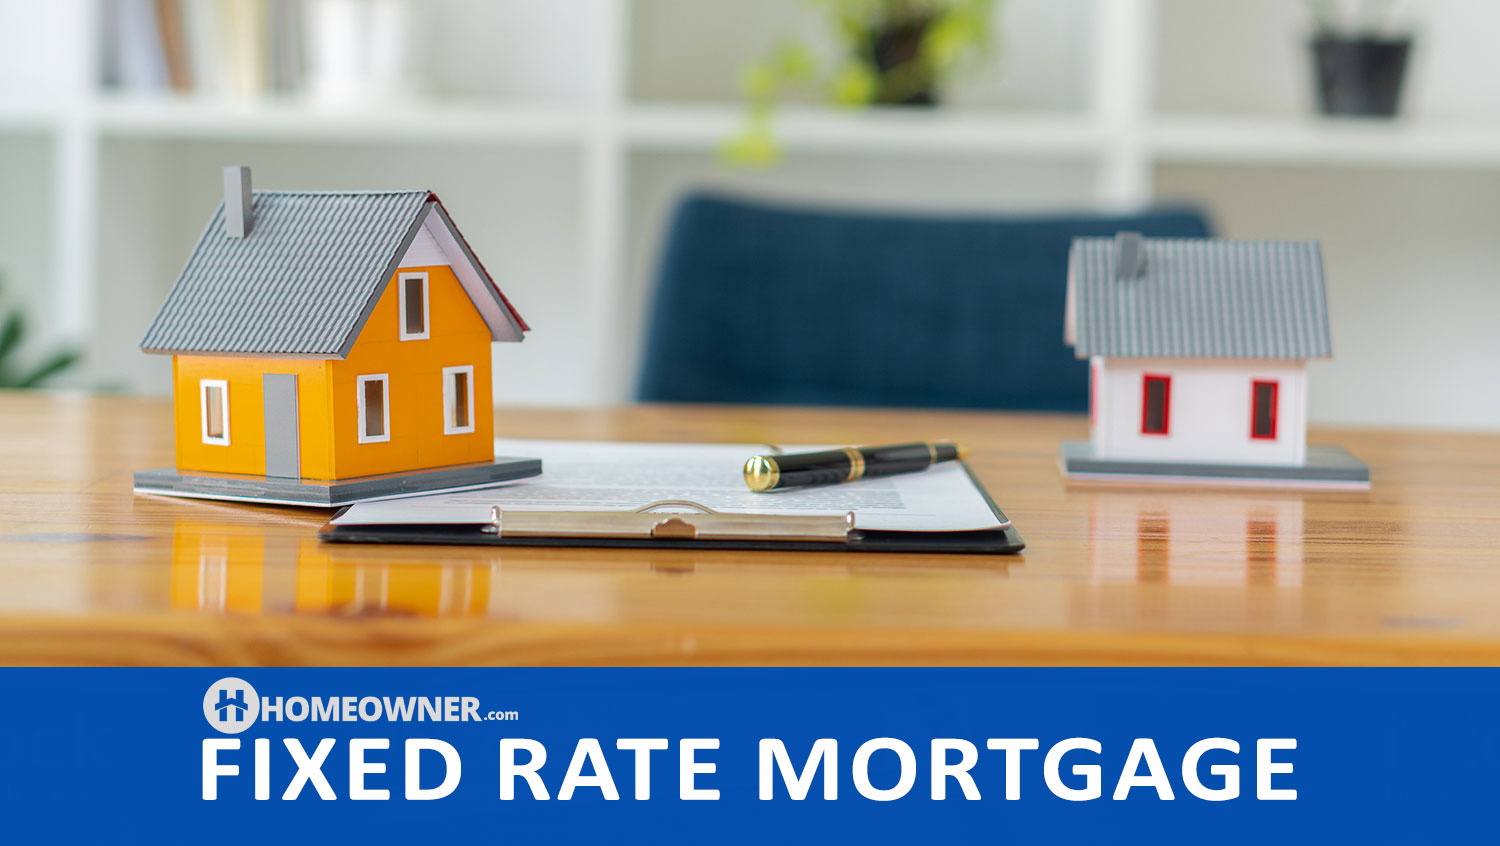 What Is a Fixed Rate Mortgage?